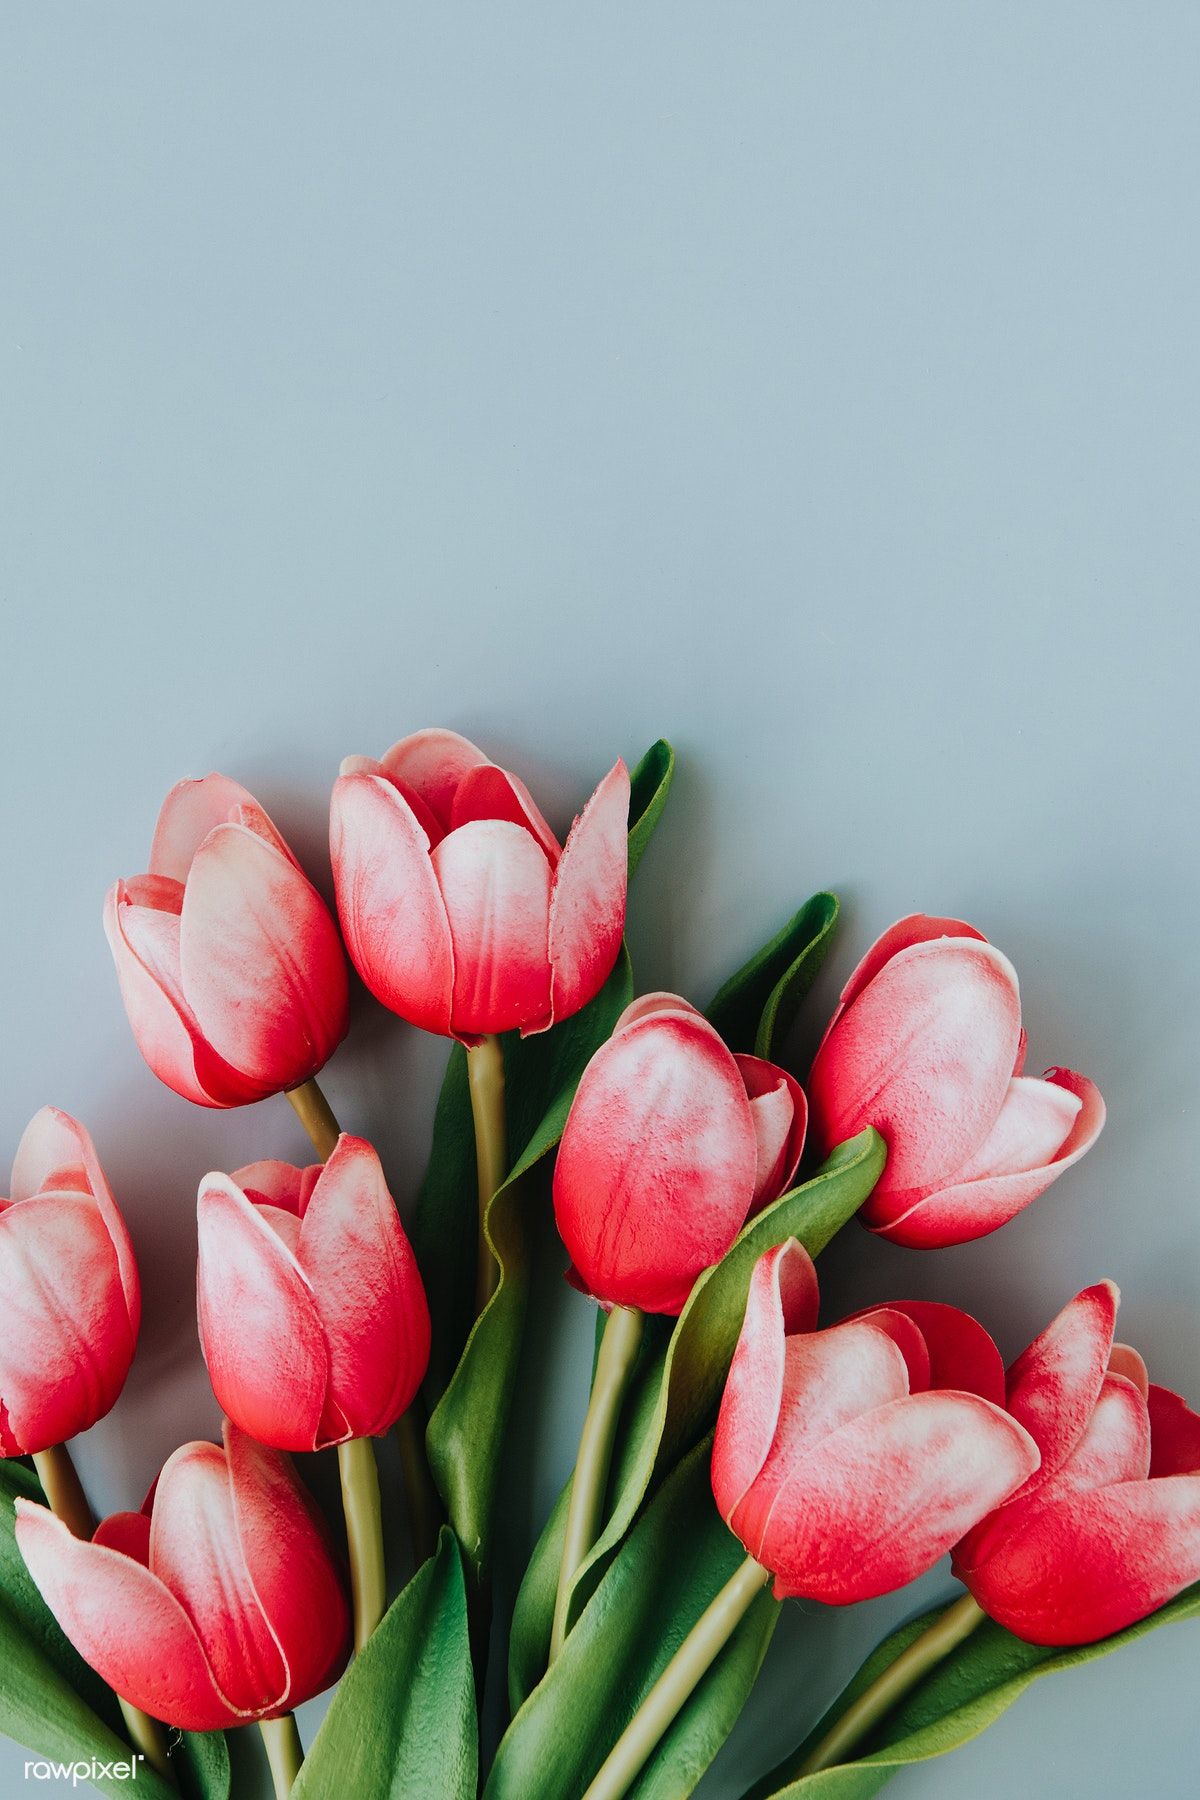 Premium Photo Of Red And White Tulip On Blank Blue